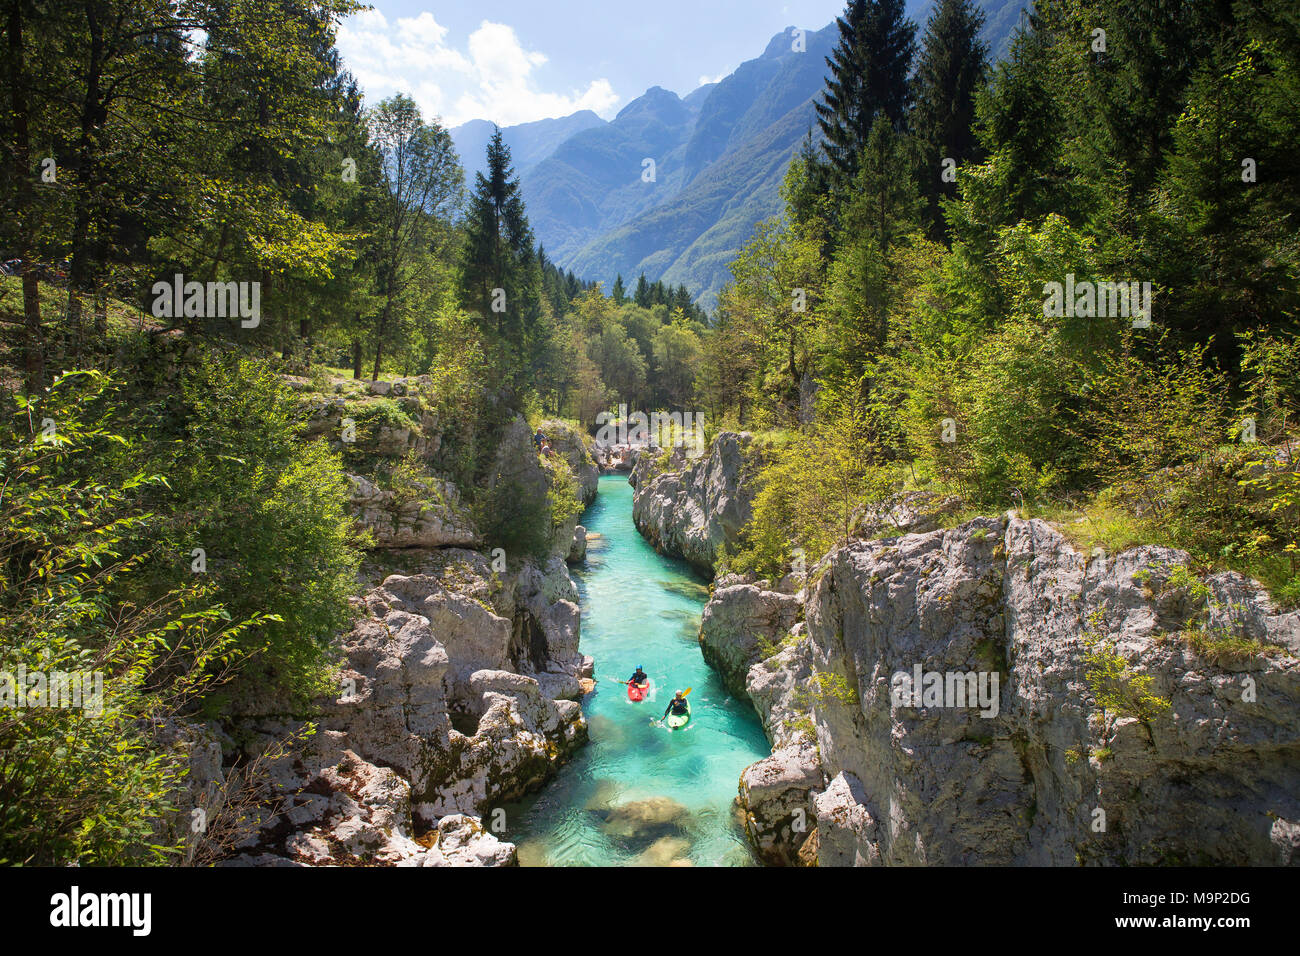 Kayakers on Soca river originating in Trigval mountains. The river is famous for all kinds of white water activities, Triglav National Park, Slovenia Stock Photo